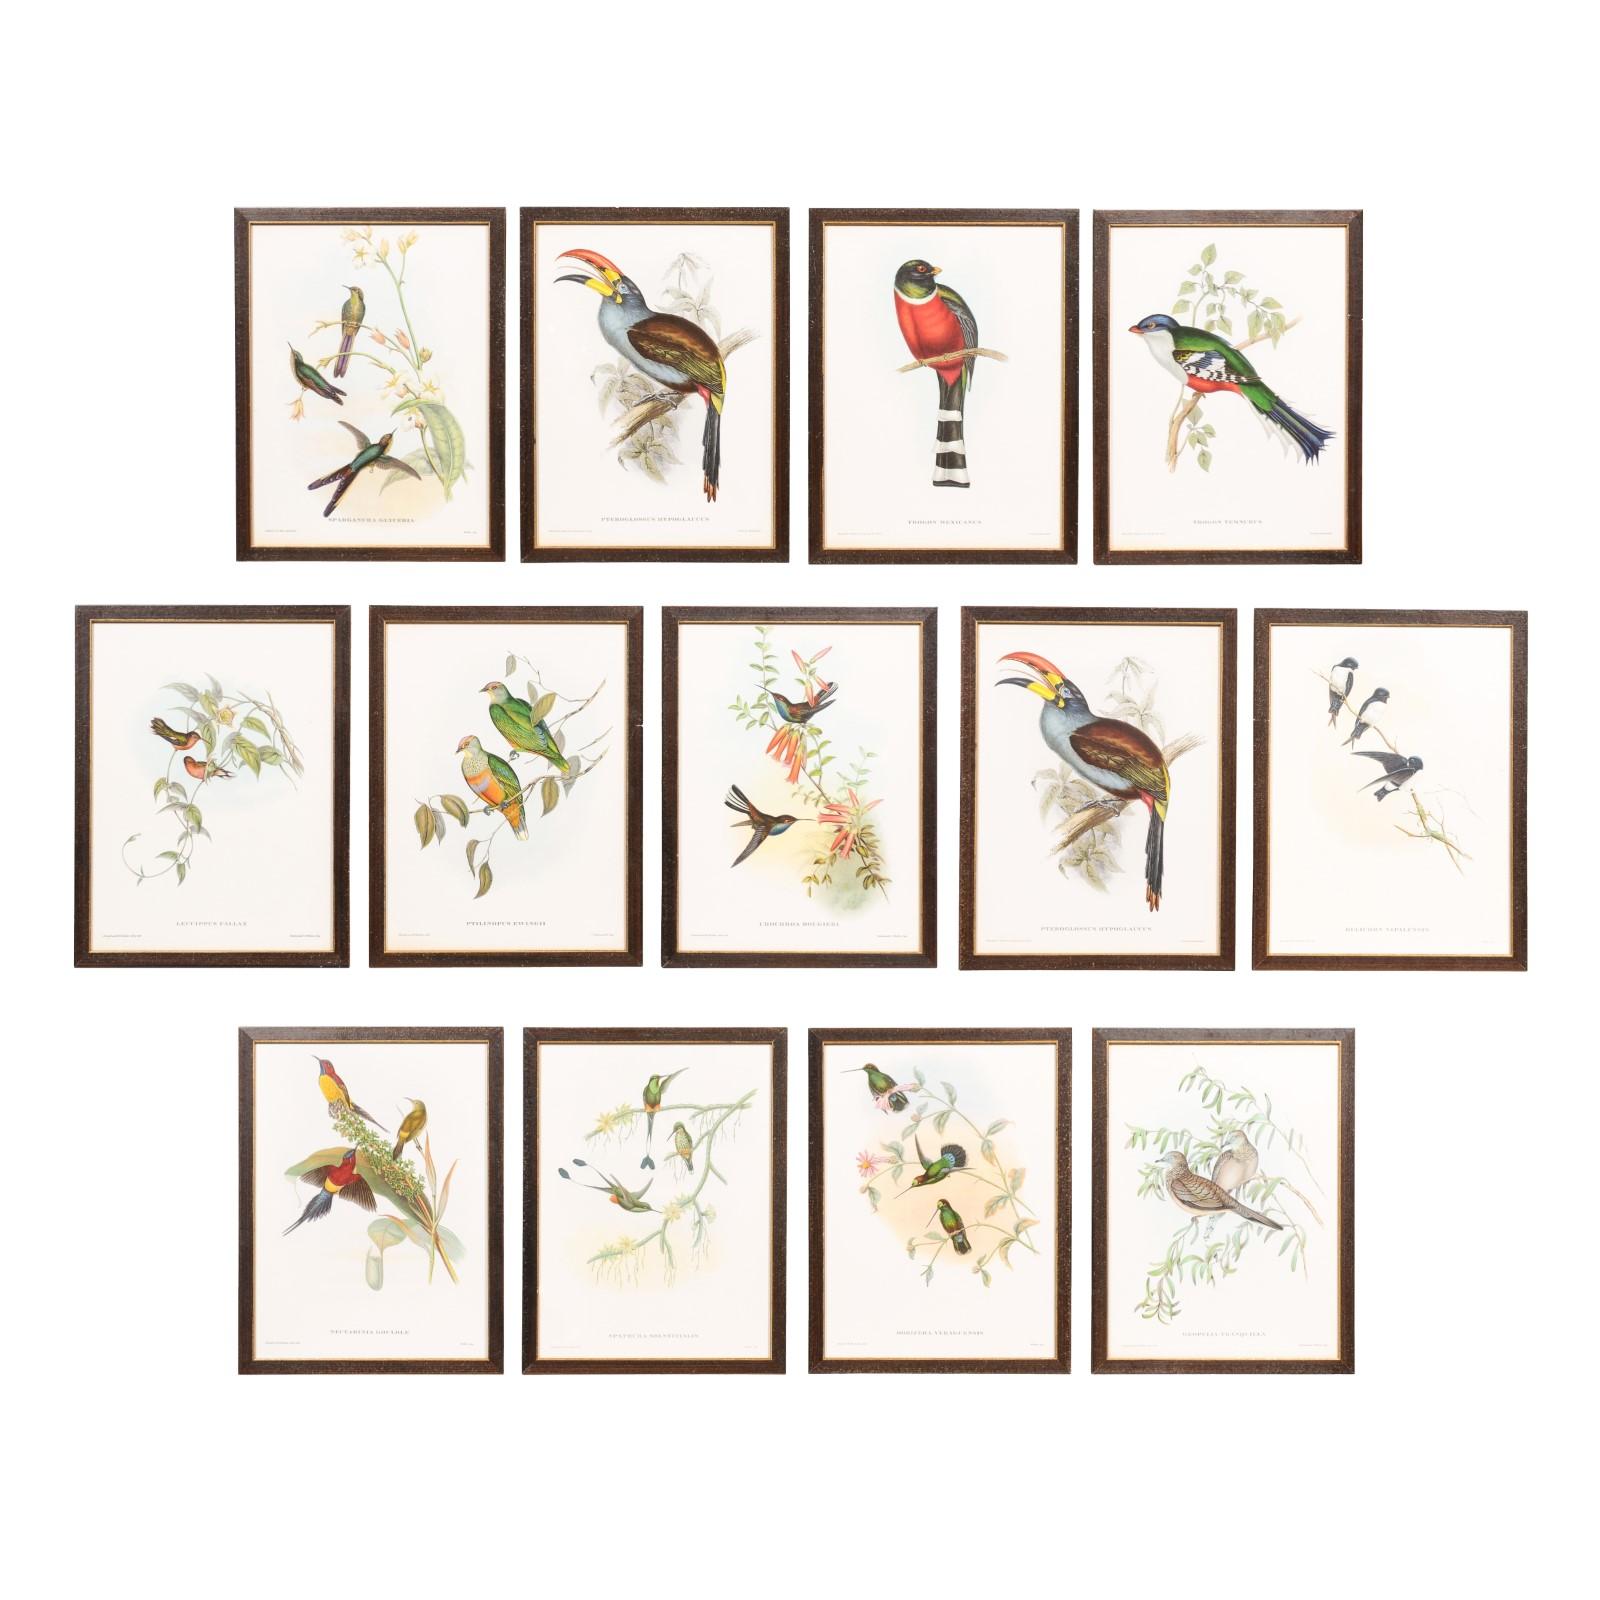 This collection of framed John Gould tropical bird prints from his limited edition of 1000, showcases the remarkable talent of the 19th-century British ornithologist. We have the privilege of presenting 13 of these prints, each priced and sold